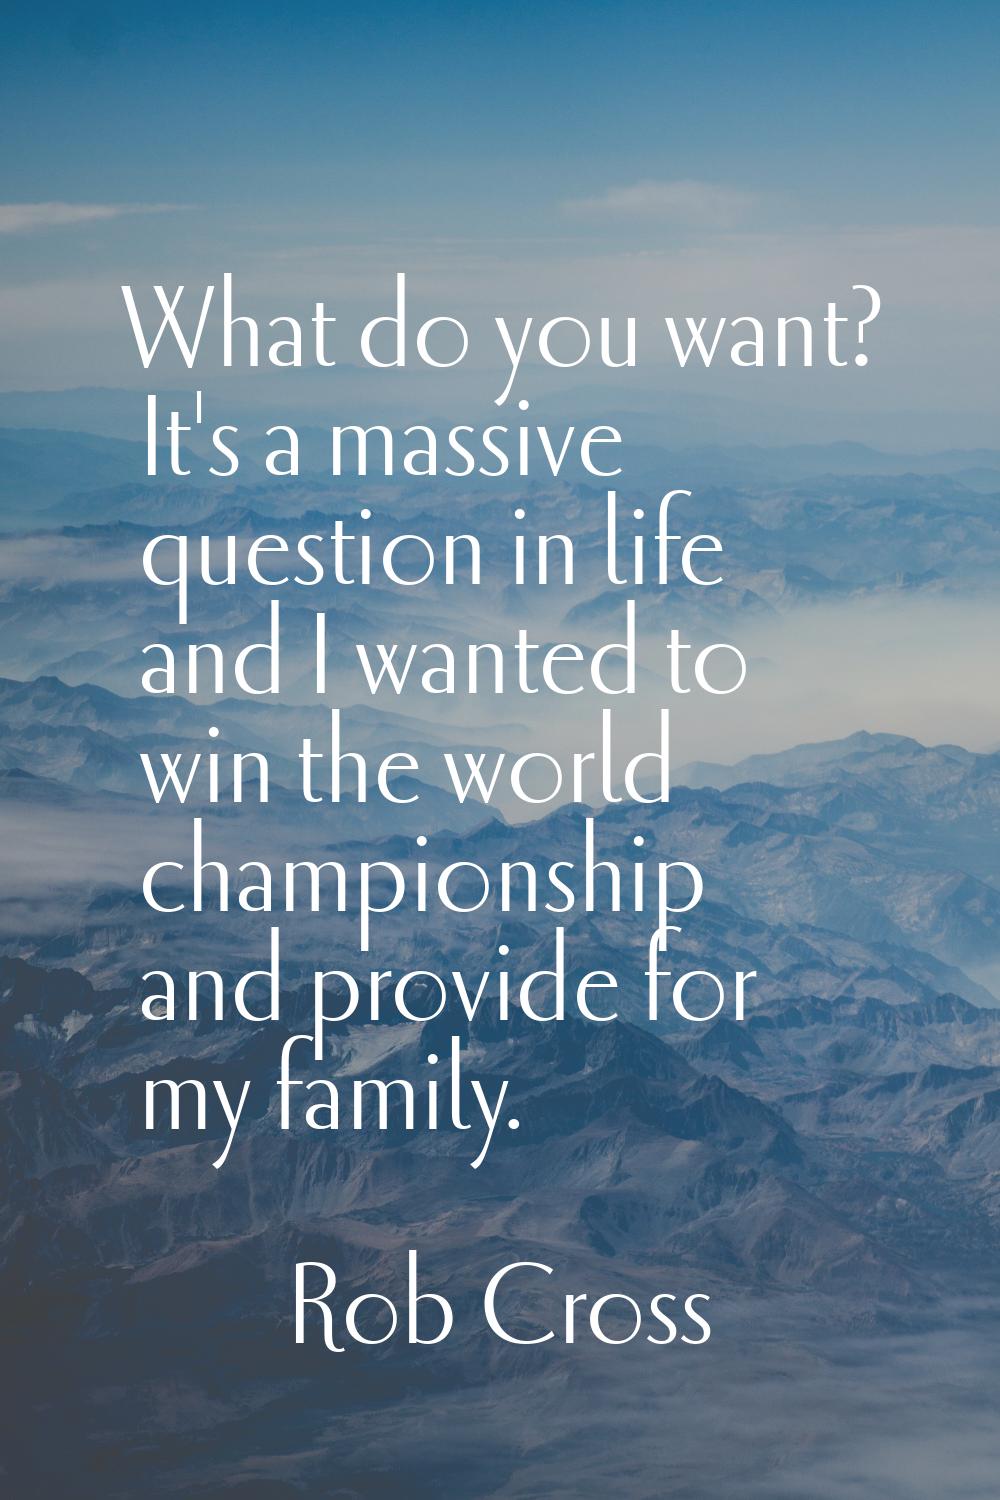 What do you want? It's a massive question in life and I wanted to win the world championship and pr